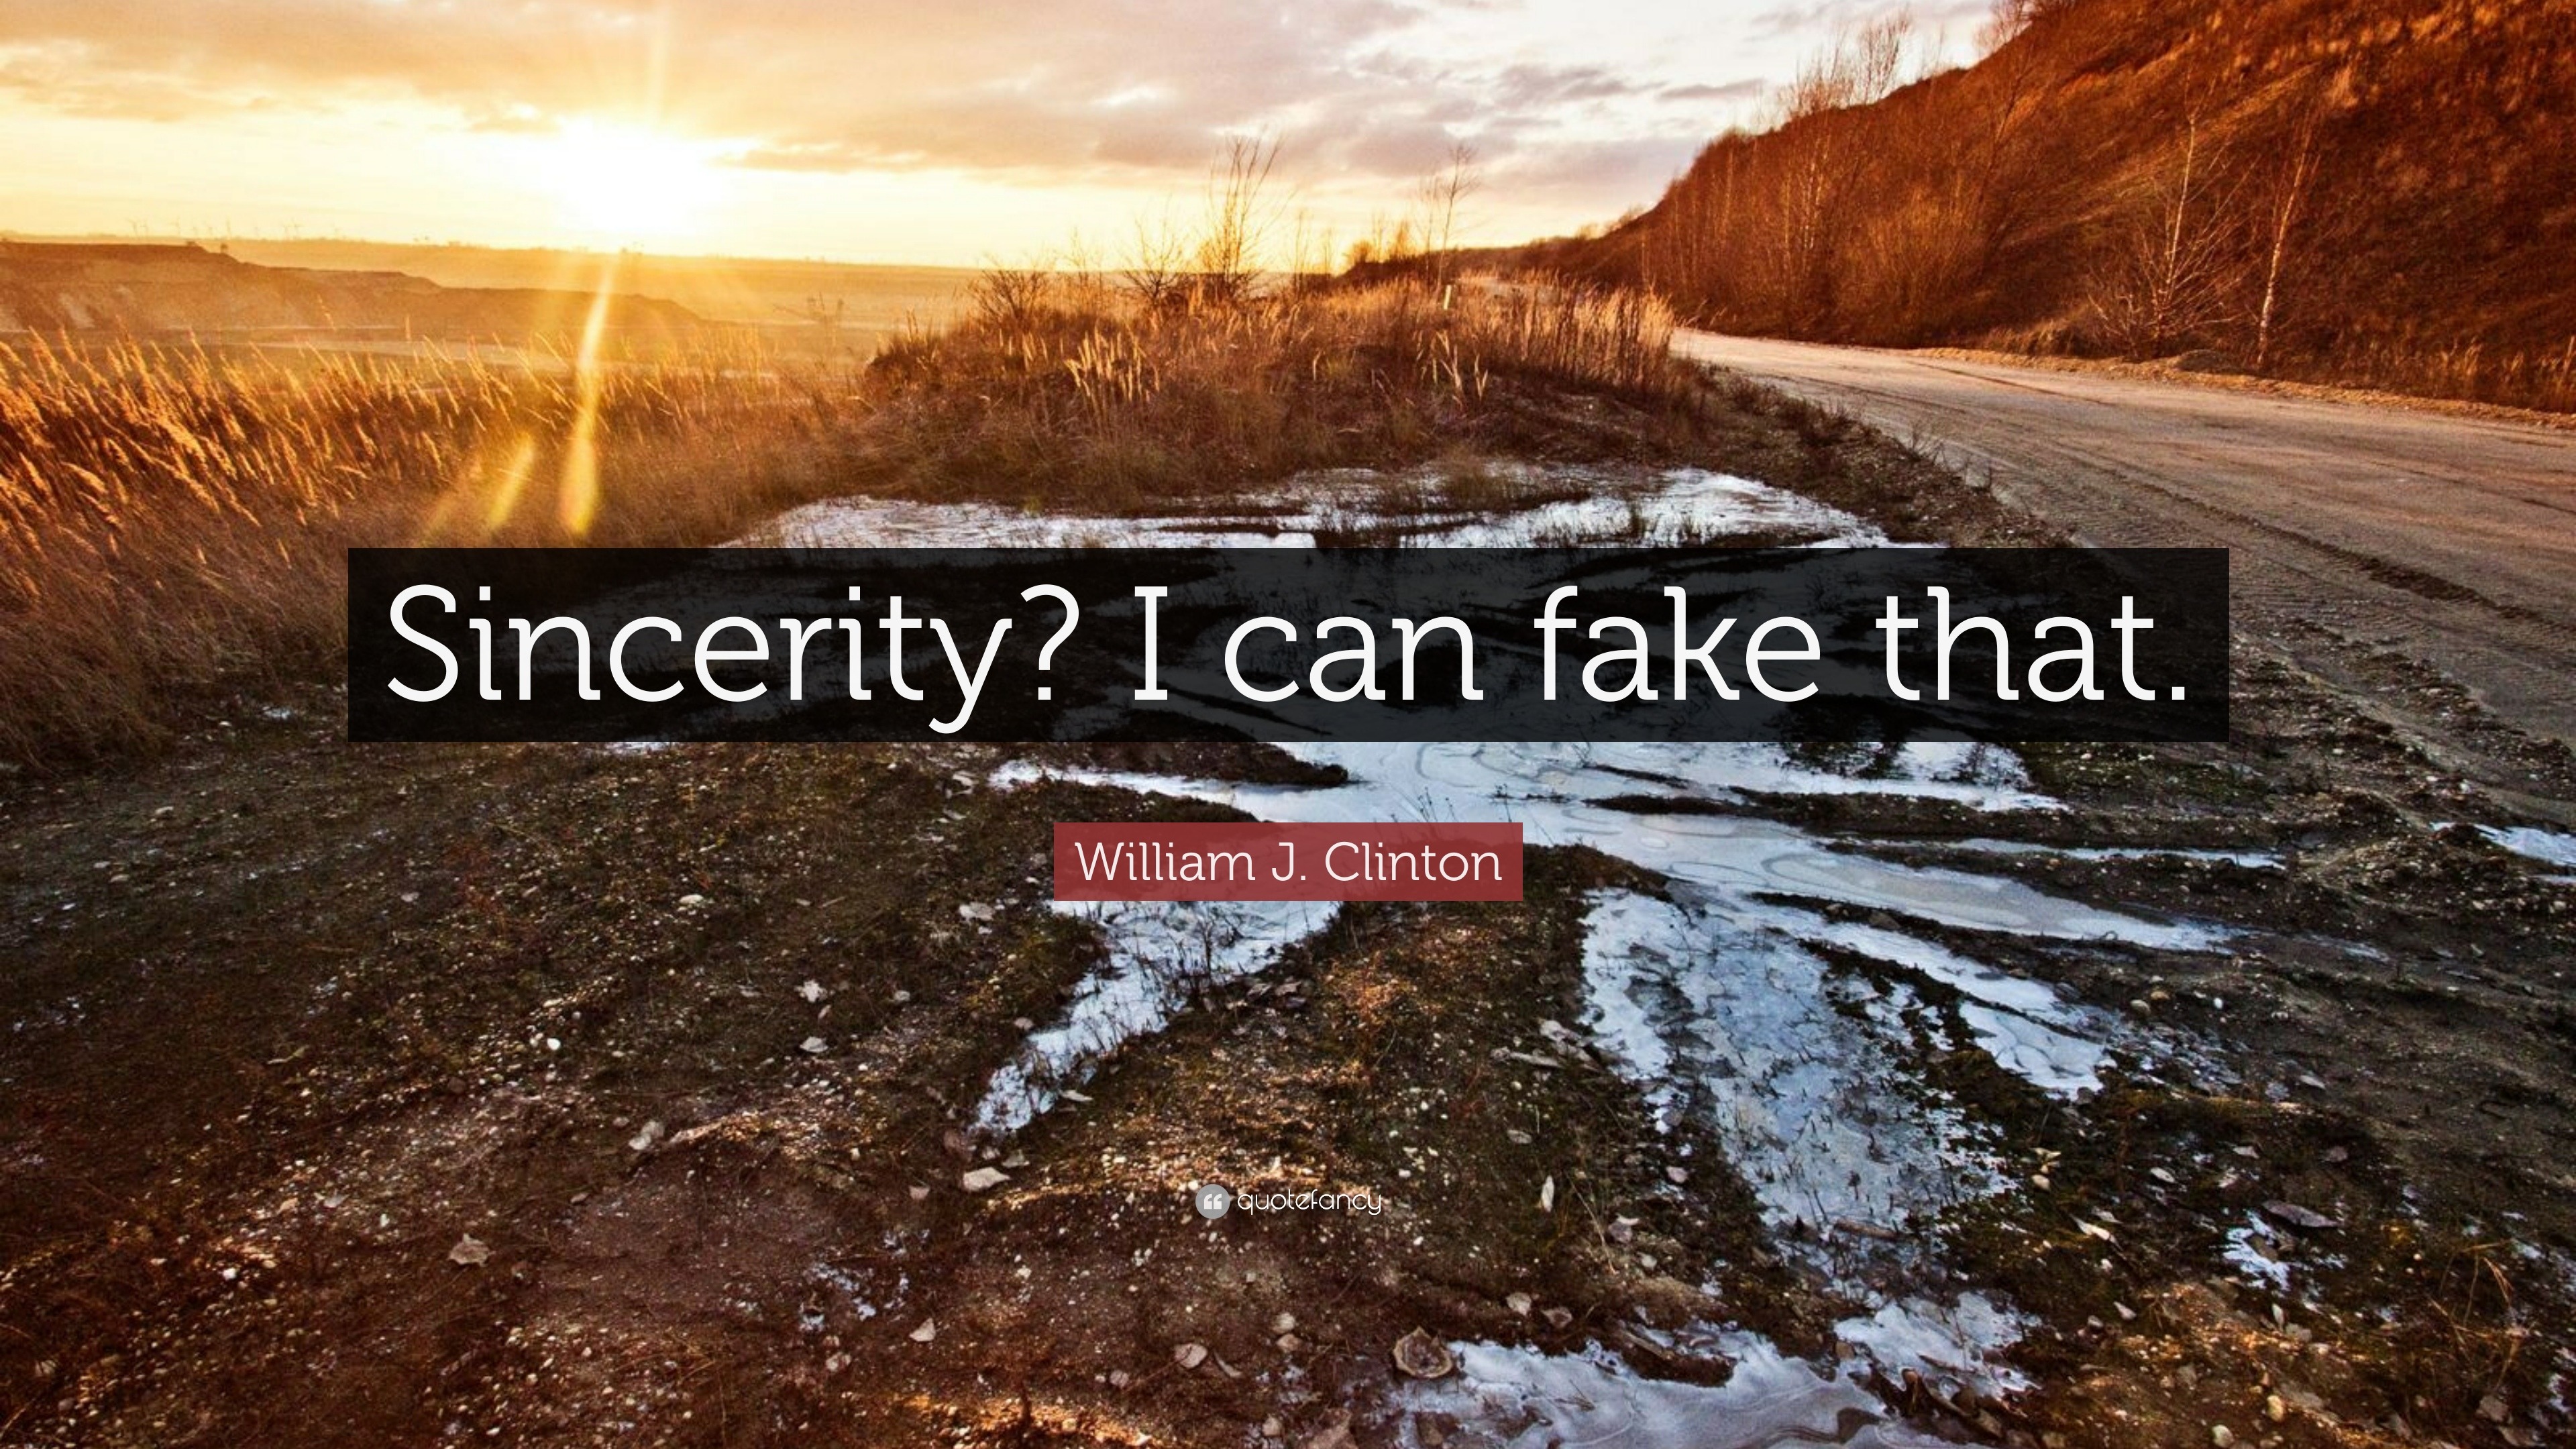 William J. Clinton Quote: “Sincerity? I can fake that.”